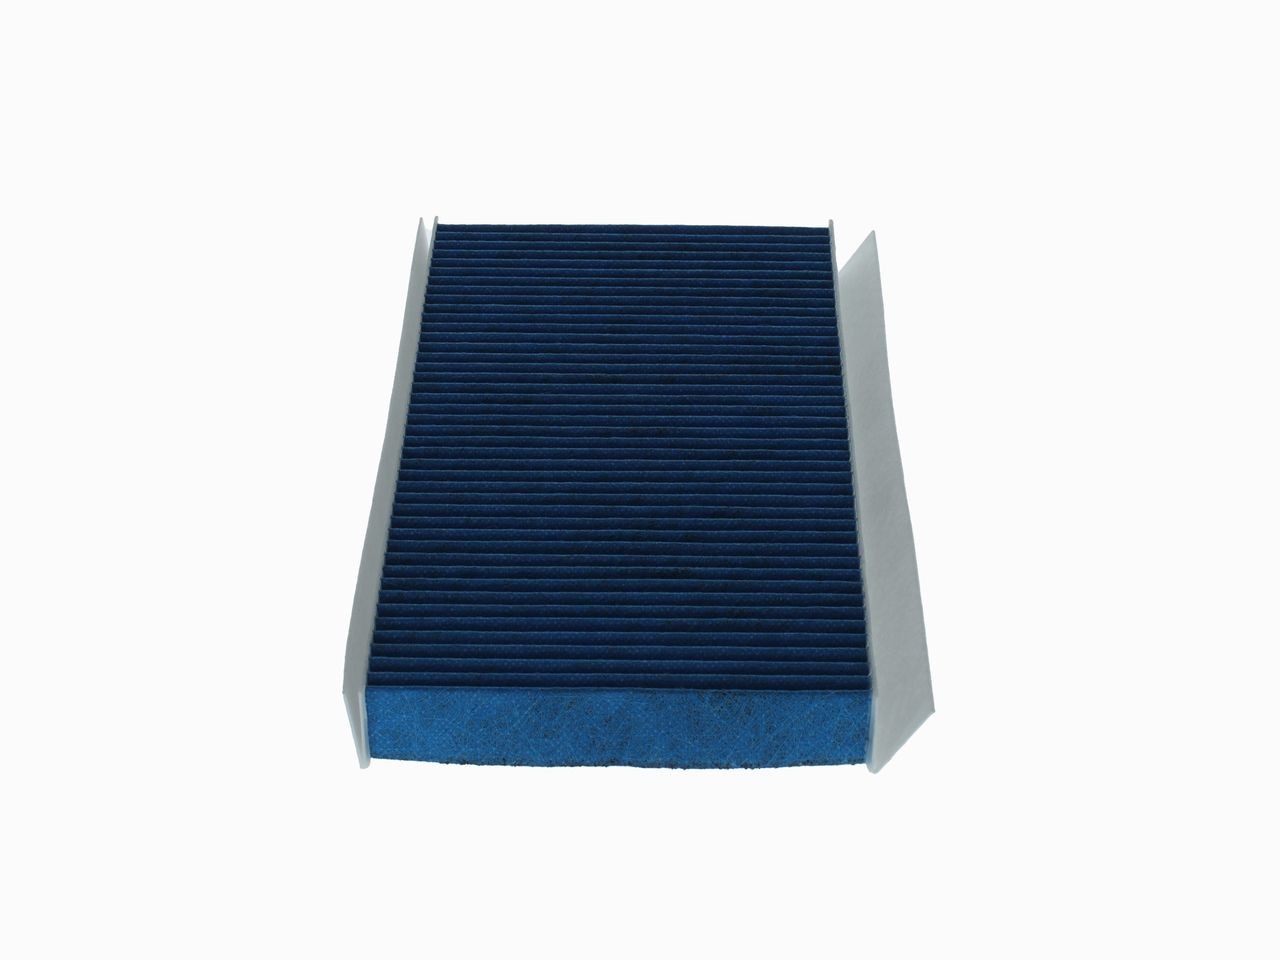 0986628616 Air con filter A 8616 BOSCH Activated Carbon Filter, with antibacterial action, Particle Separation Rate >98% for 2.5µm (fine matter), with anti-allergic effect, with antiviral effect, with fungicidal effect, 344 mm x 163 mm x 30 mm